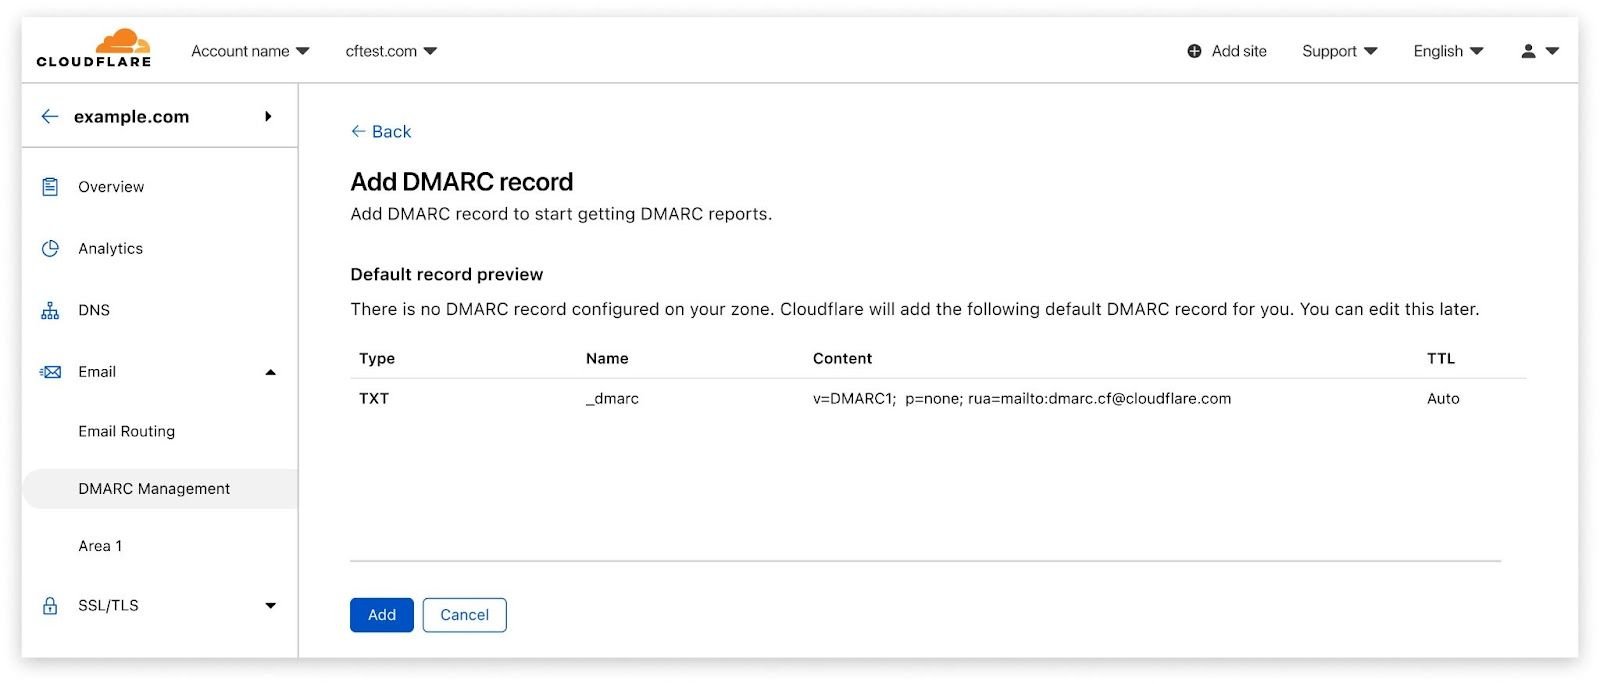 Stop brand impersonation with Cloudflare DMARC Management